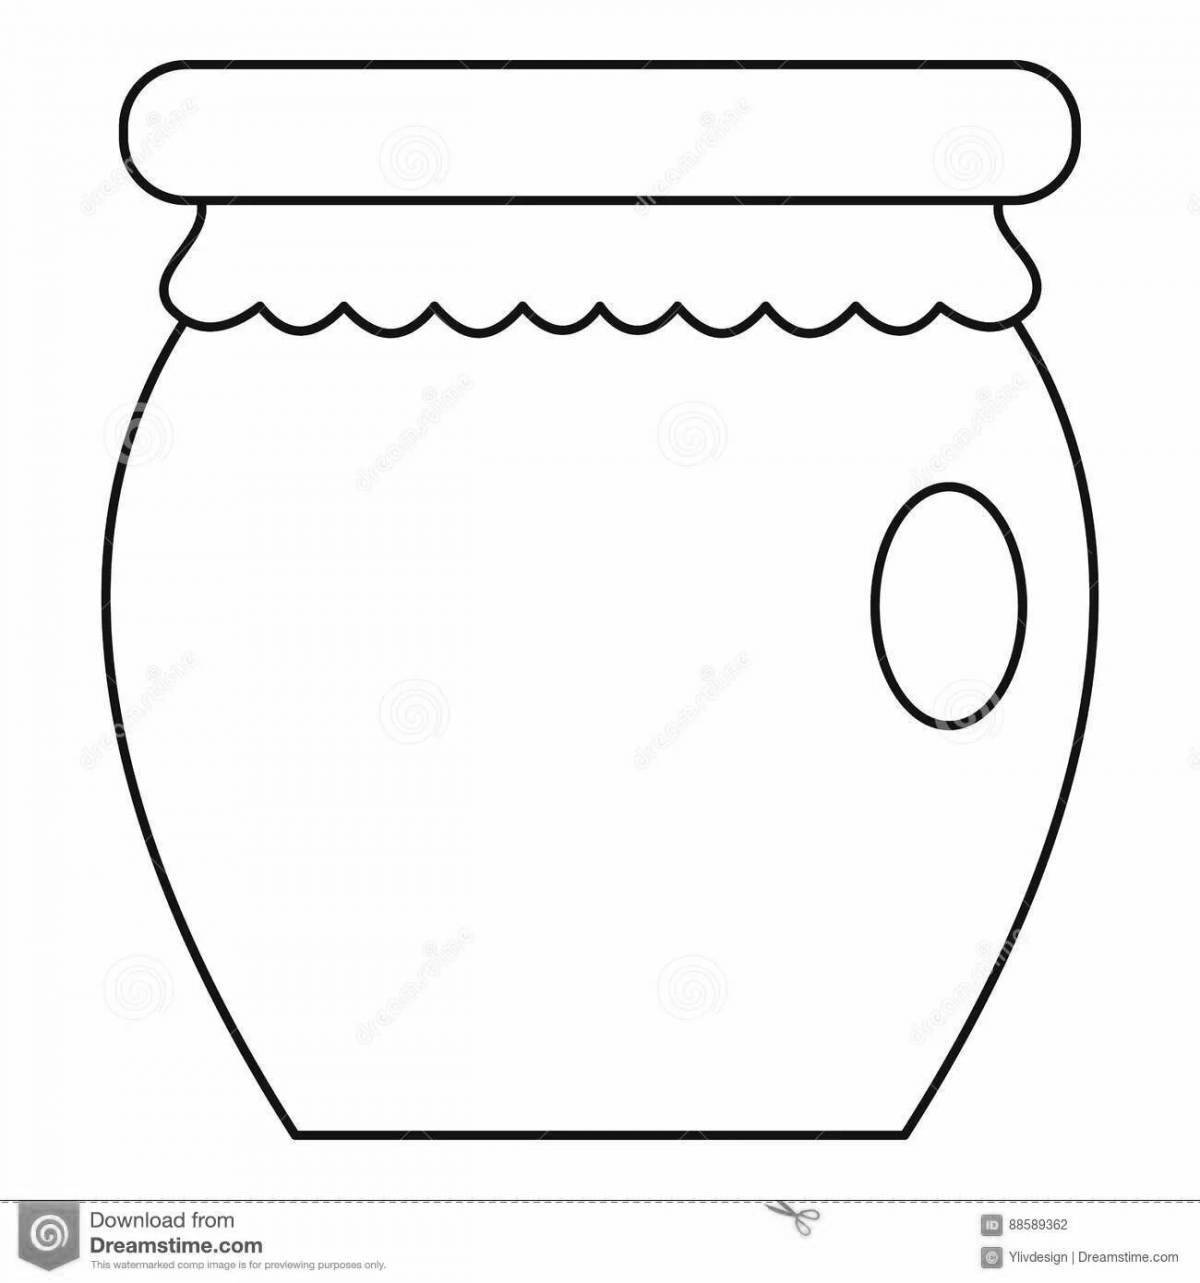 Charming pot coloring page